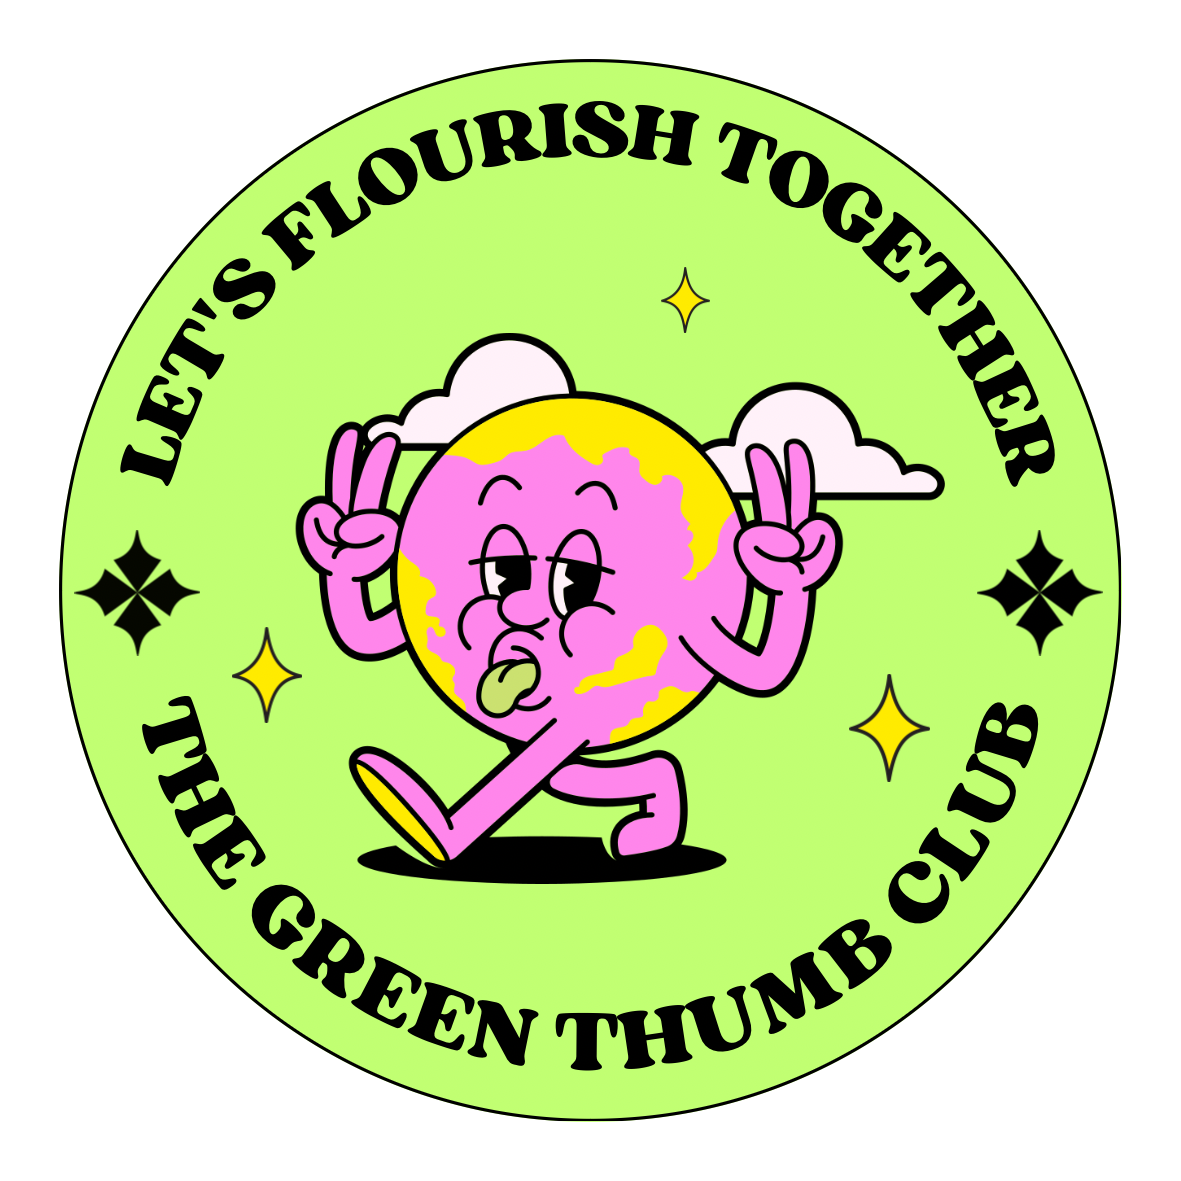 Welcome to the Green Thumb Club: Where Gardening Dreams Bloom and We Grow Together!